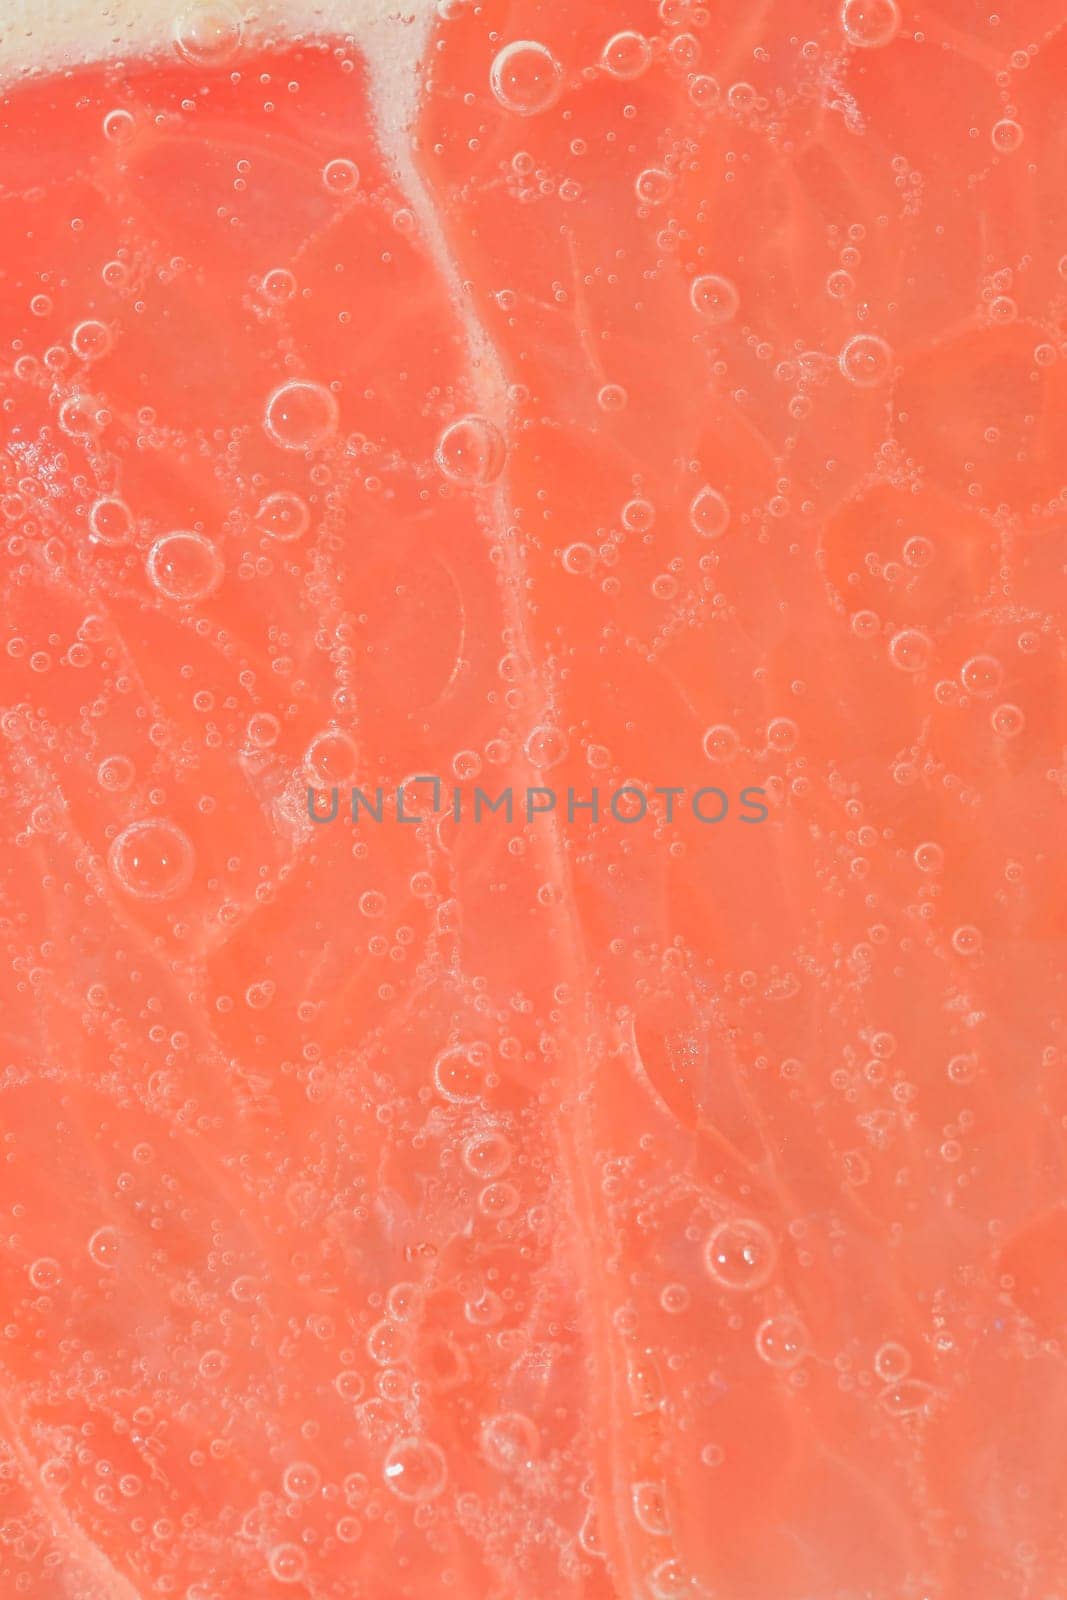 Close-up of a grapefruit slice in liquid with bubbles. Slice of ripe grapefruit in water. Close-up of fresh grapefruit slice covered by bubbles. Macro vertical image. Abstract and background